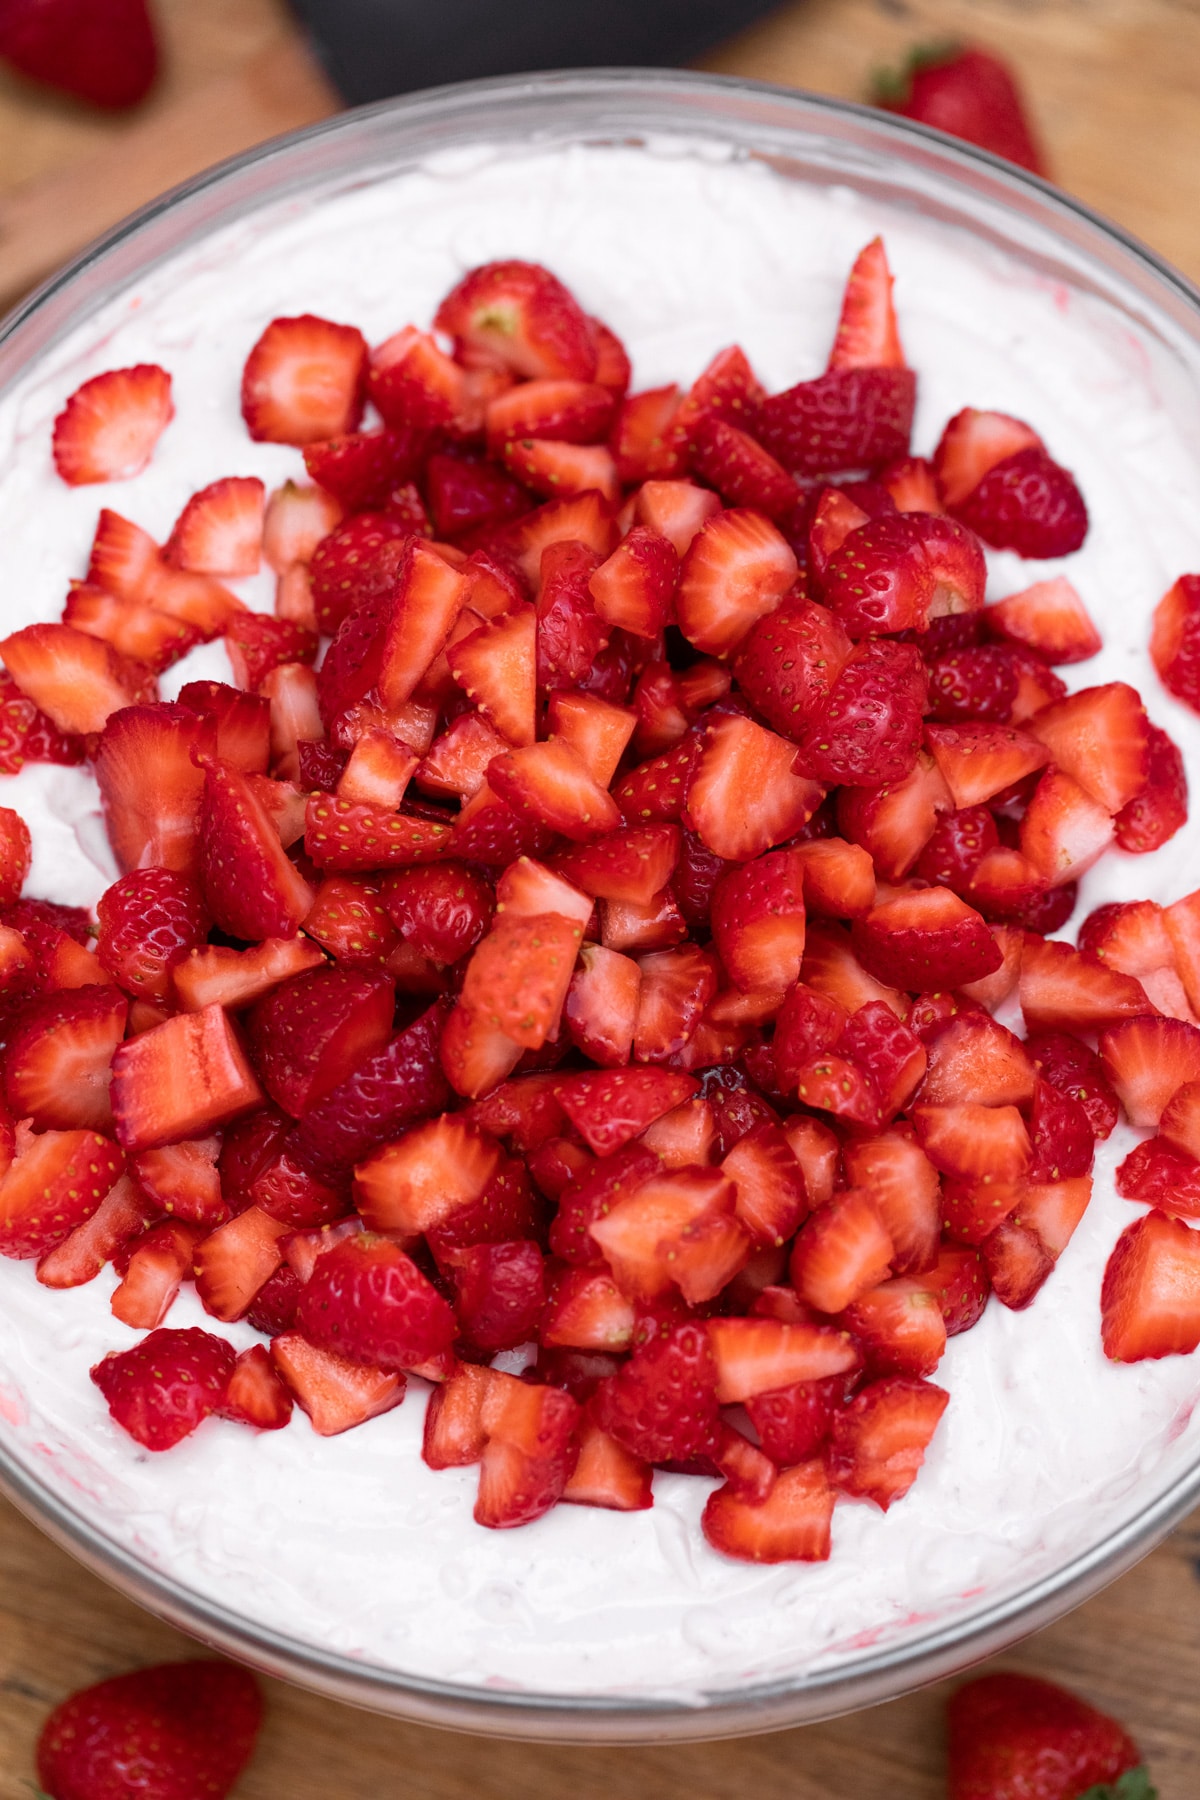 Adding strawberries to cheesecake filling